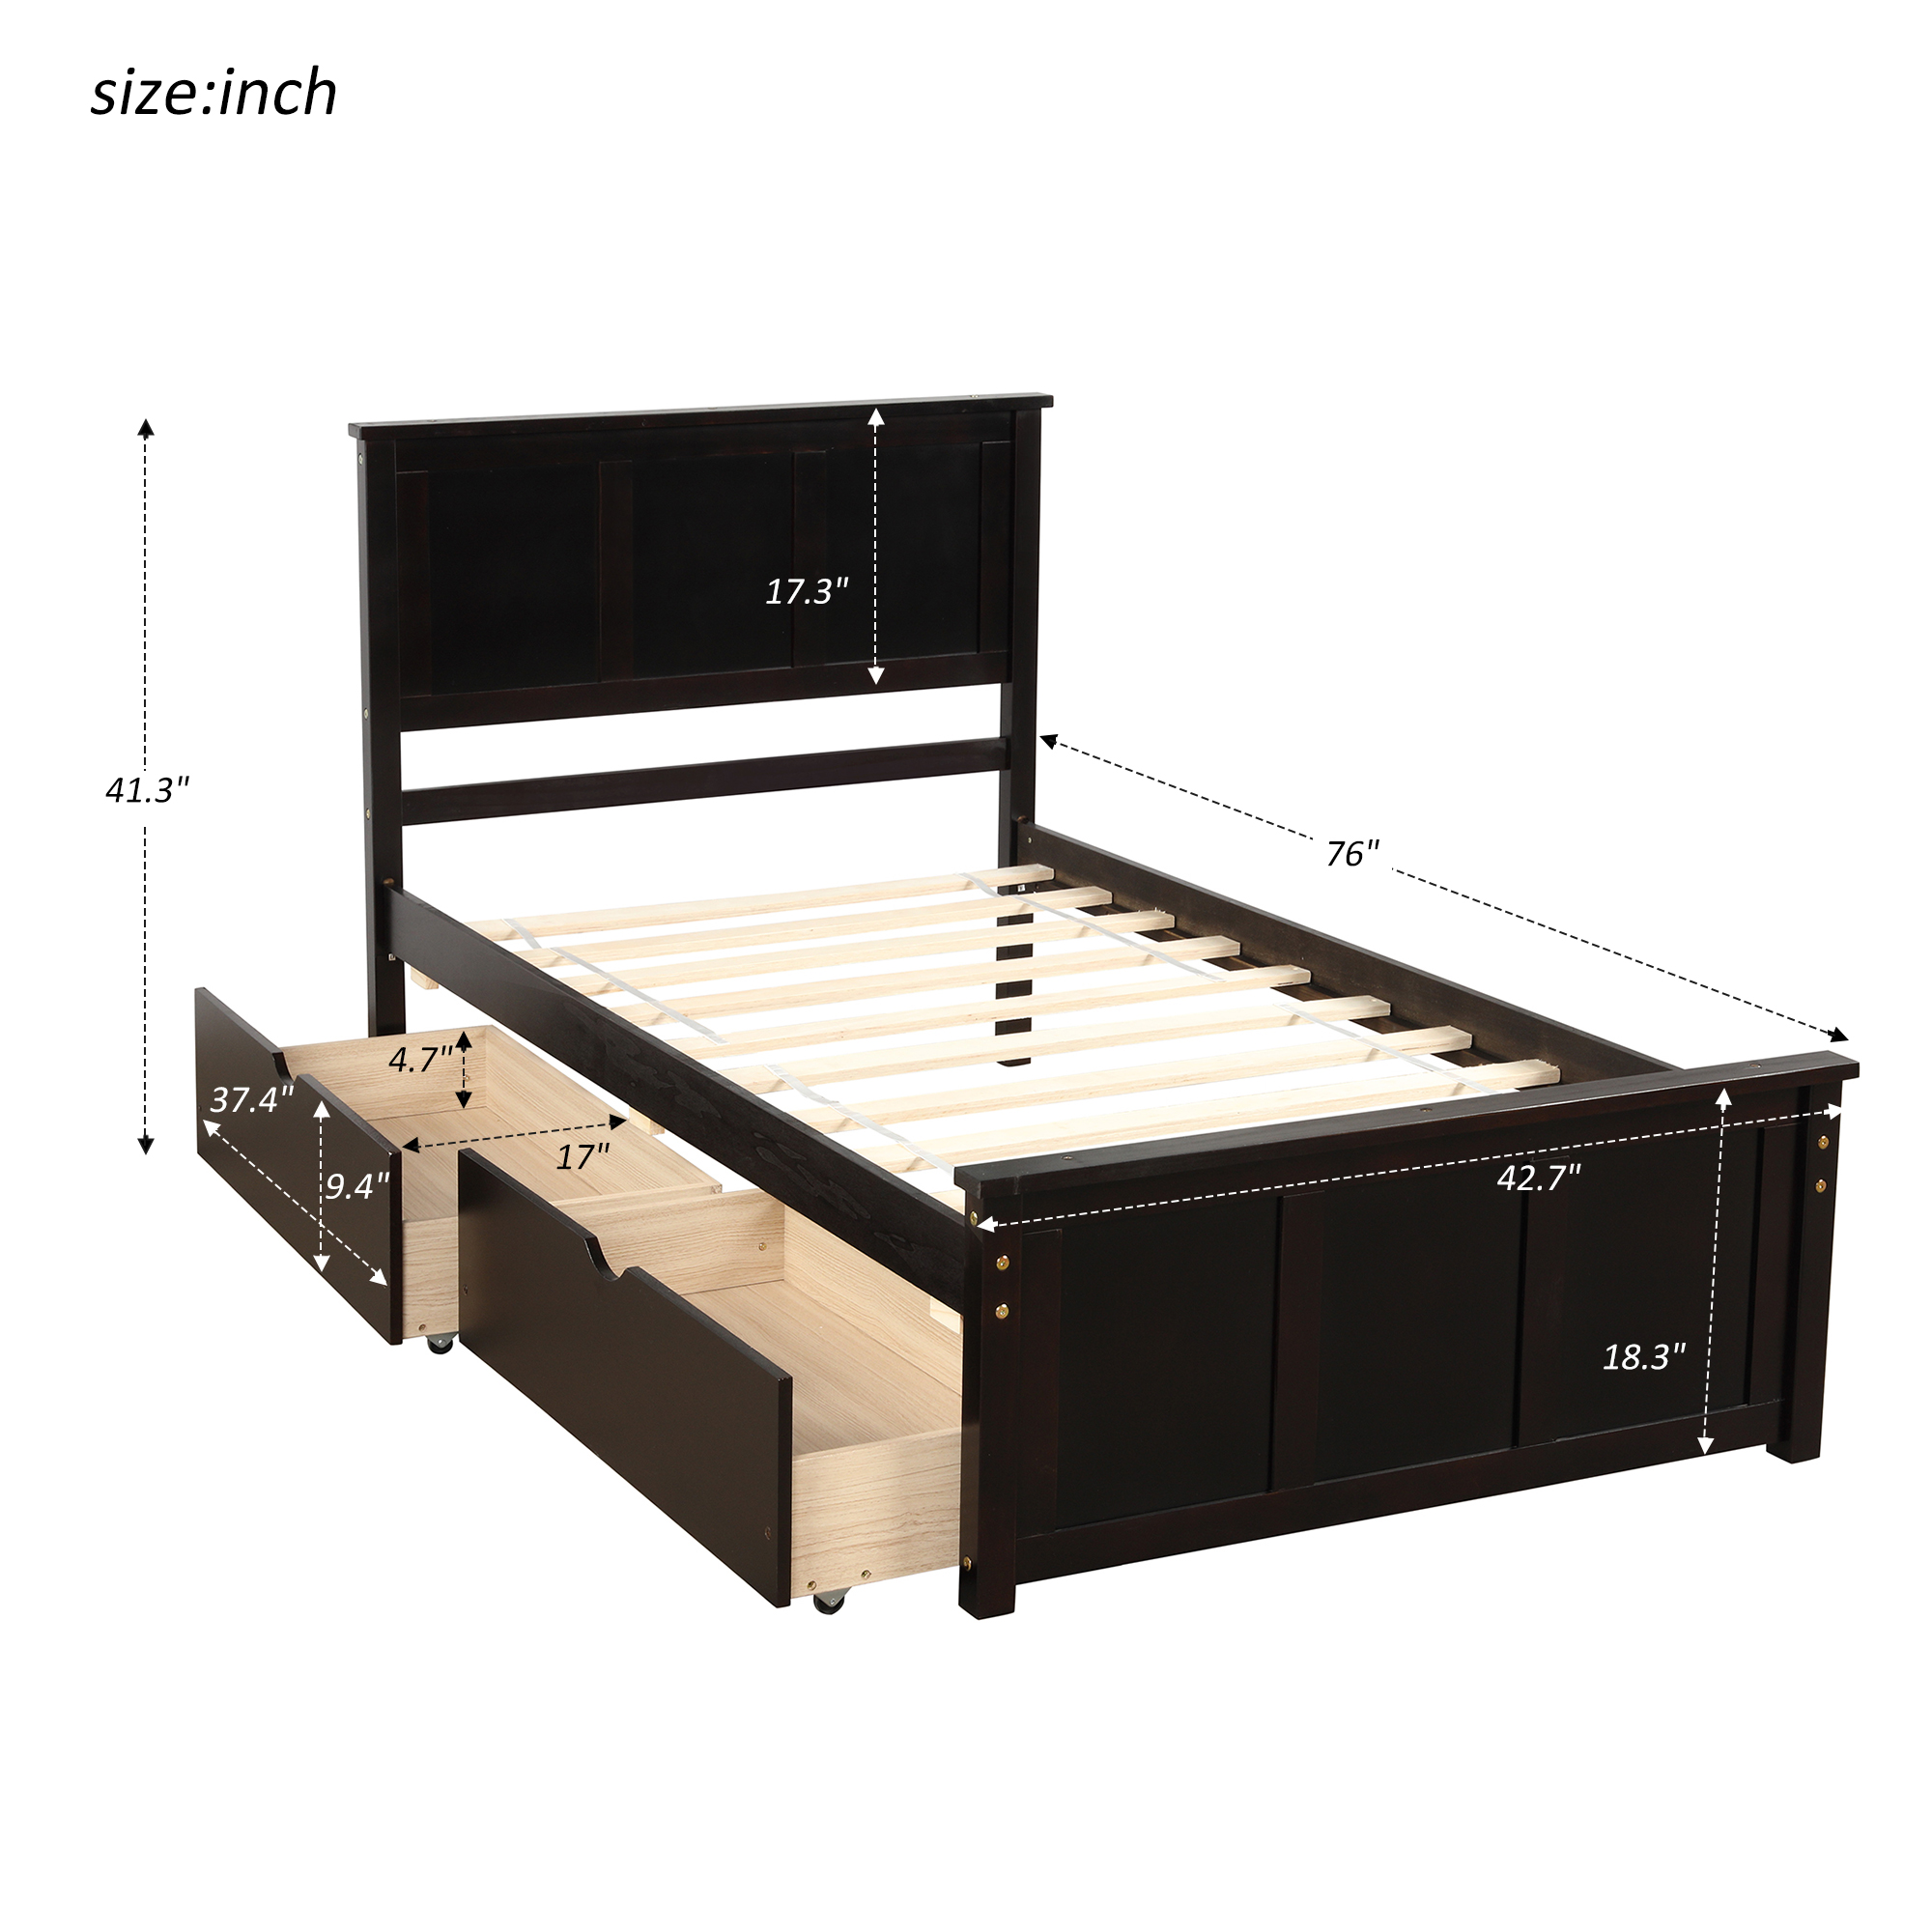 Euroco Wood Twin Platform Bed with Headboard & 2 Storage Drawers for Kids, Espresso - image 3 of 10